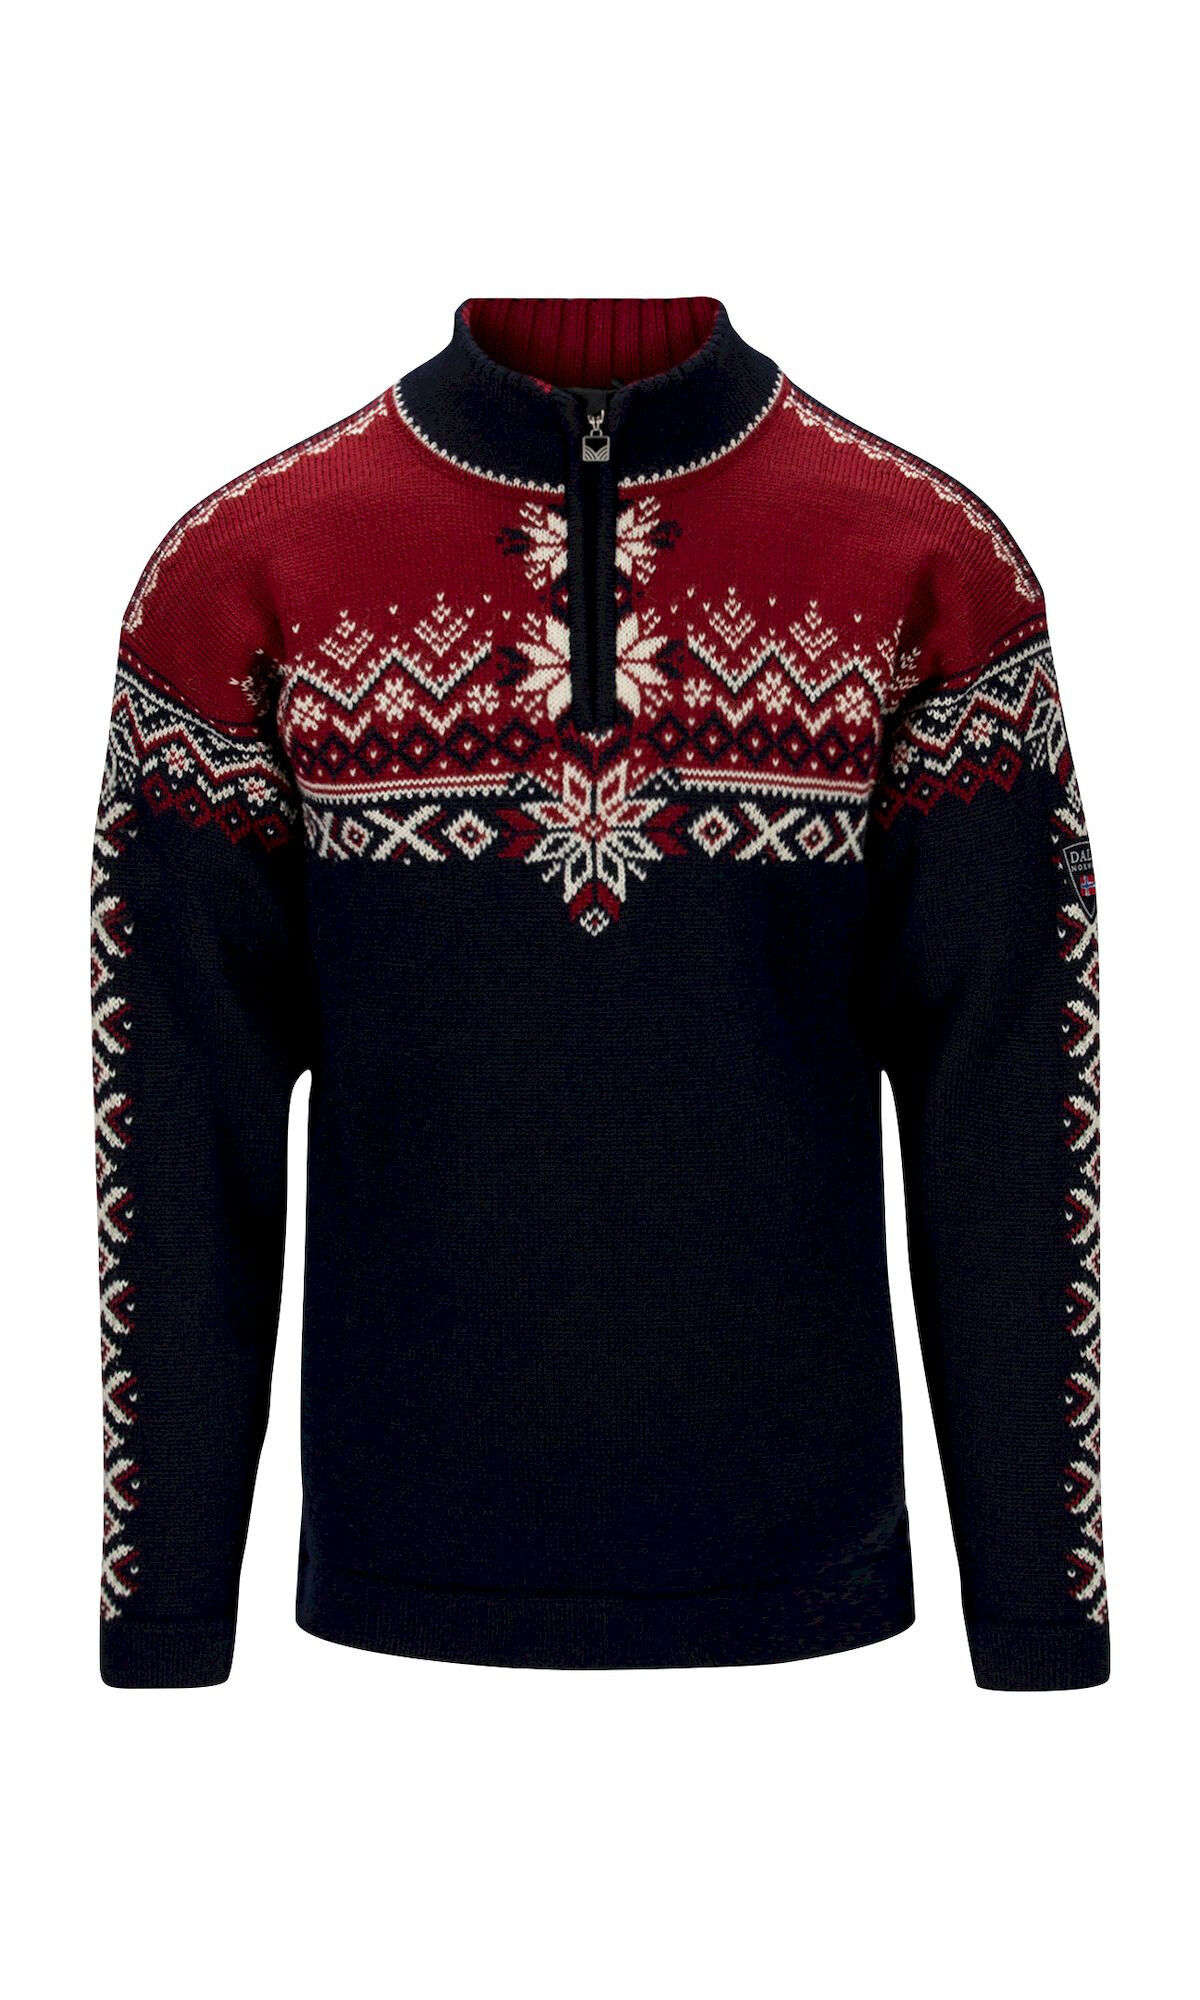 Dale of Norway 140th Anniversary Sweater - Pull en laine mérinos homme | Hardloop